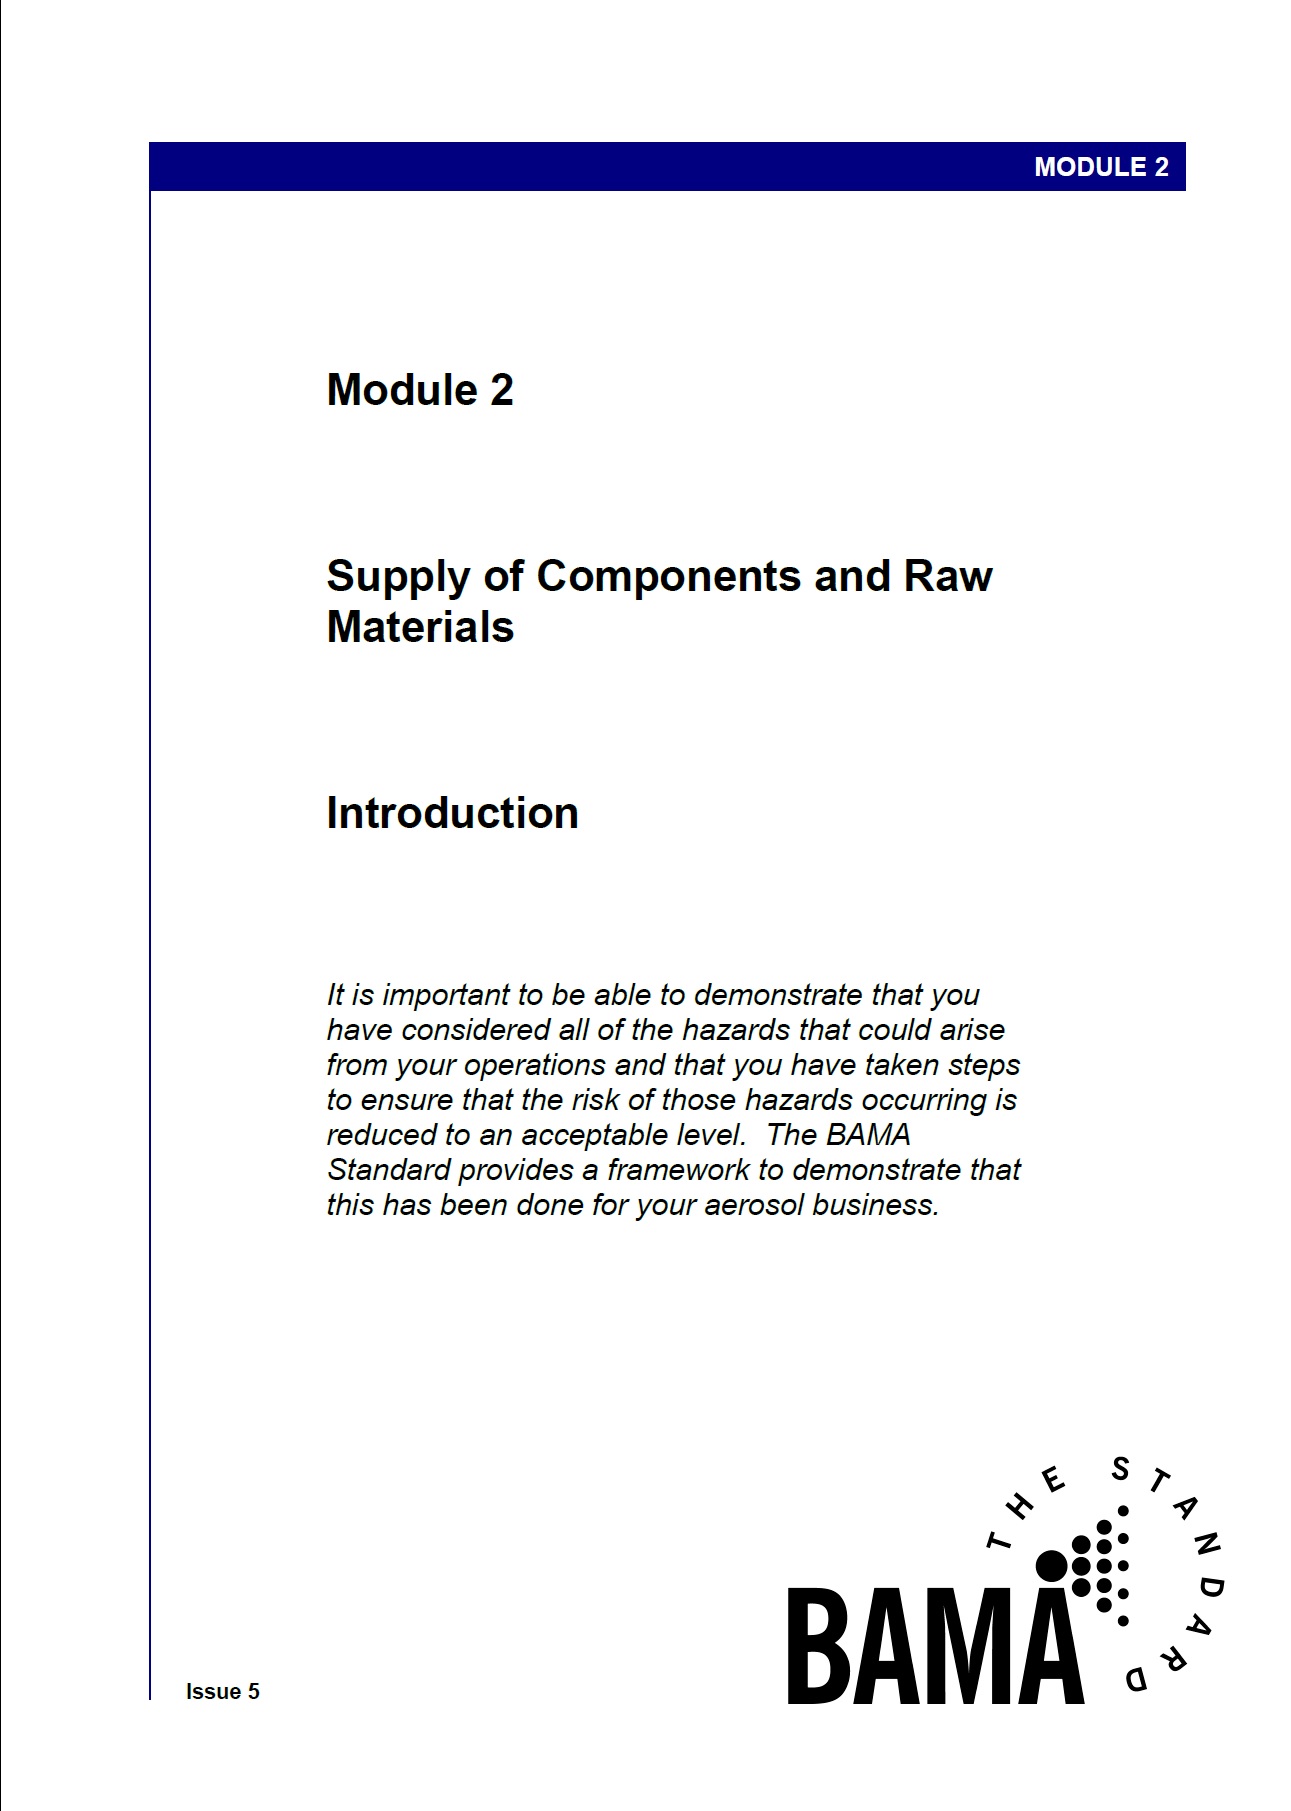 Module 2: Supply of Components and Raw Material